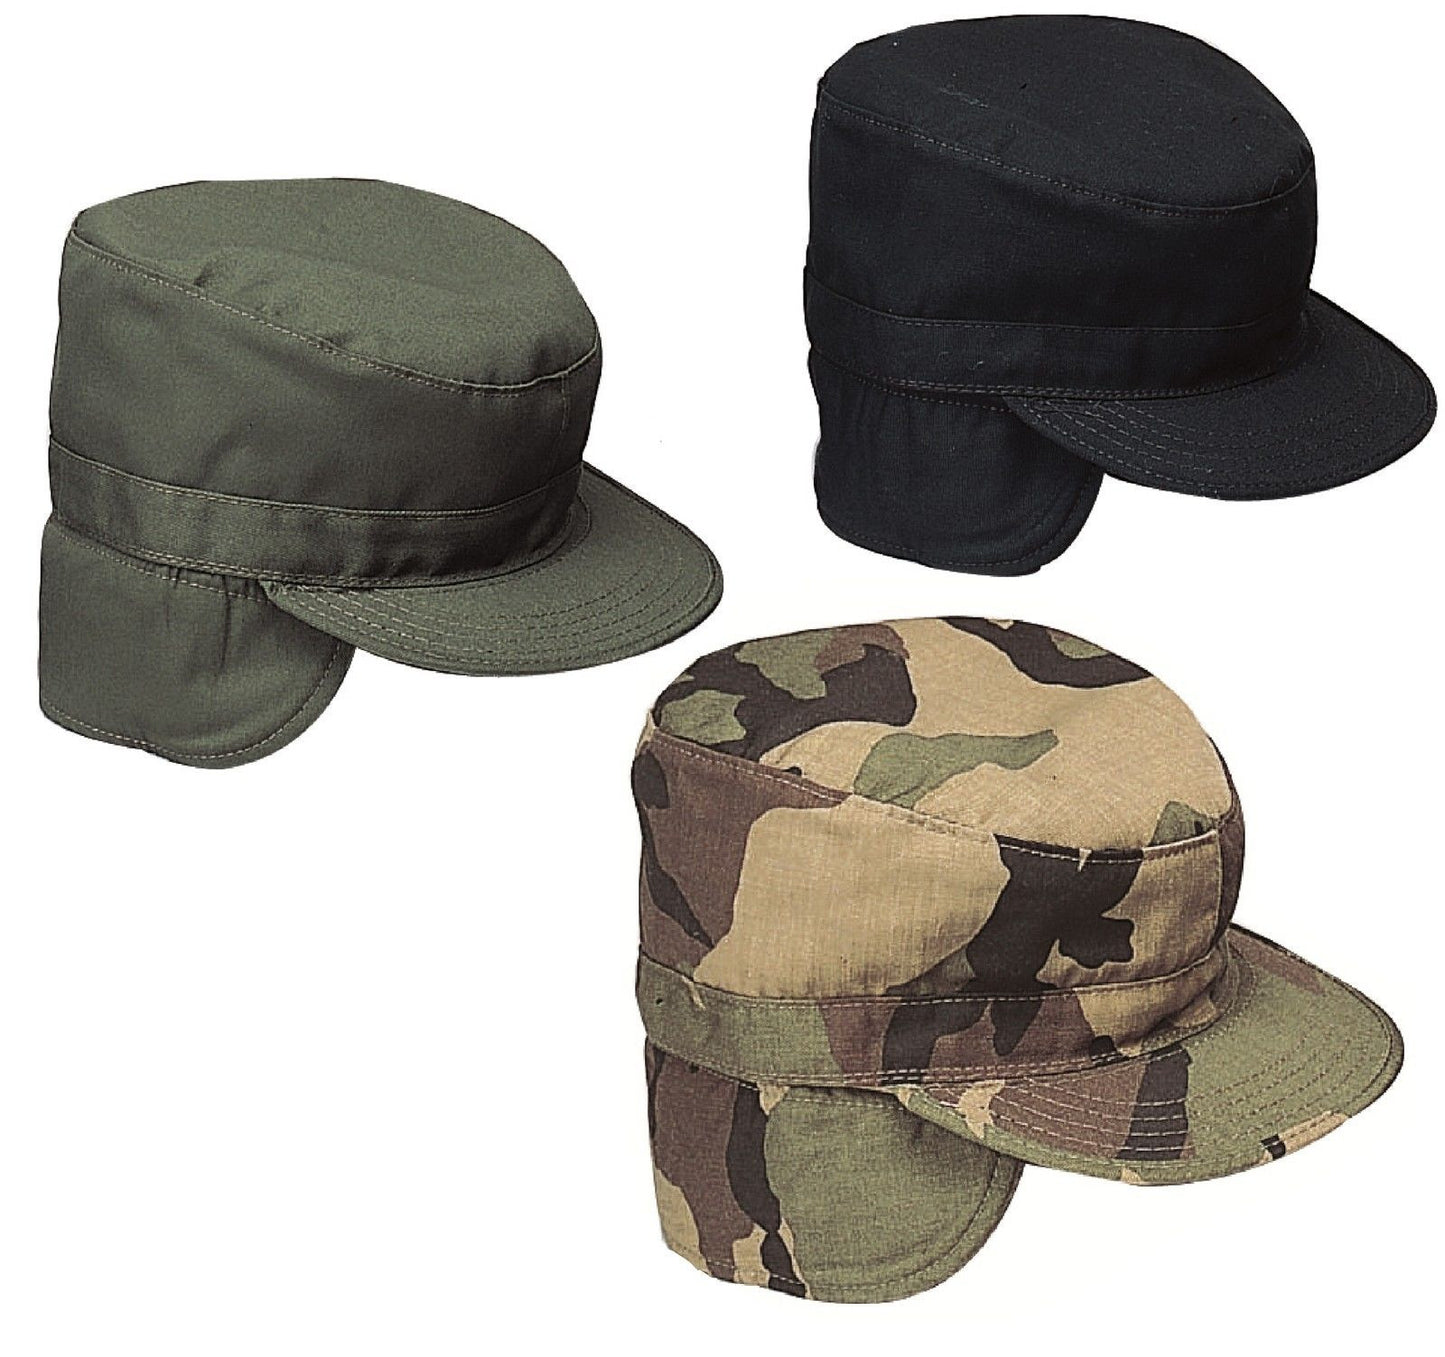 Ear Flap Combat Hats Army Style Winter Fatigue Caps w/ Earflaps